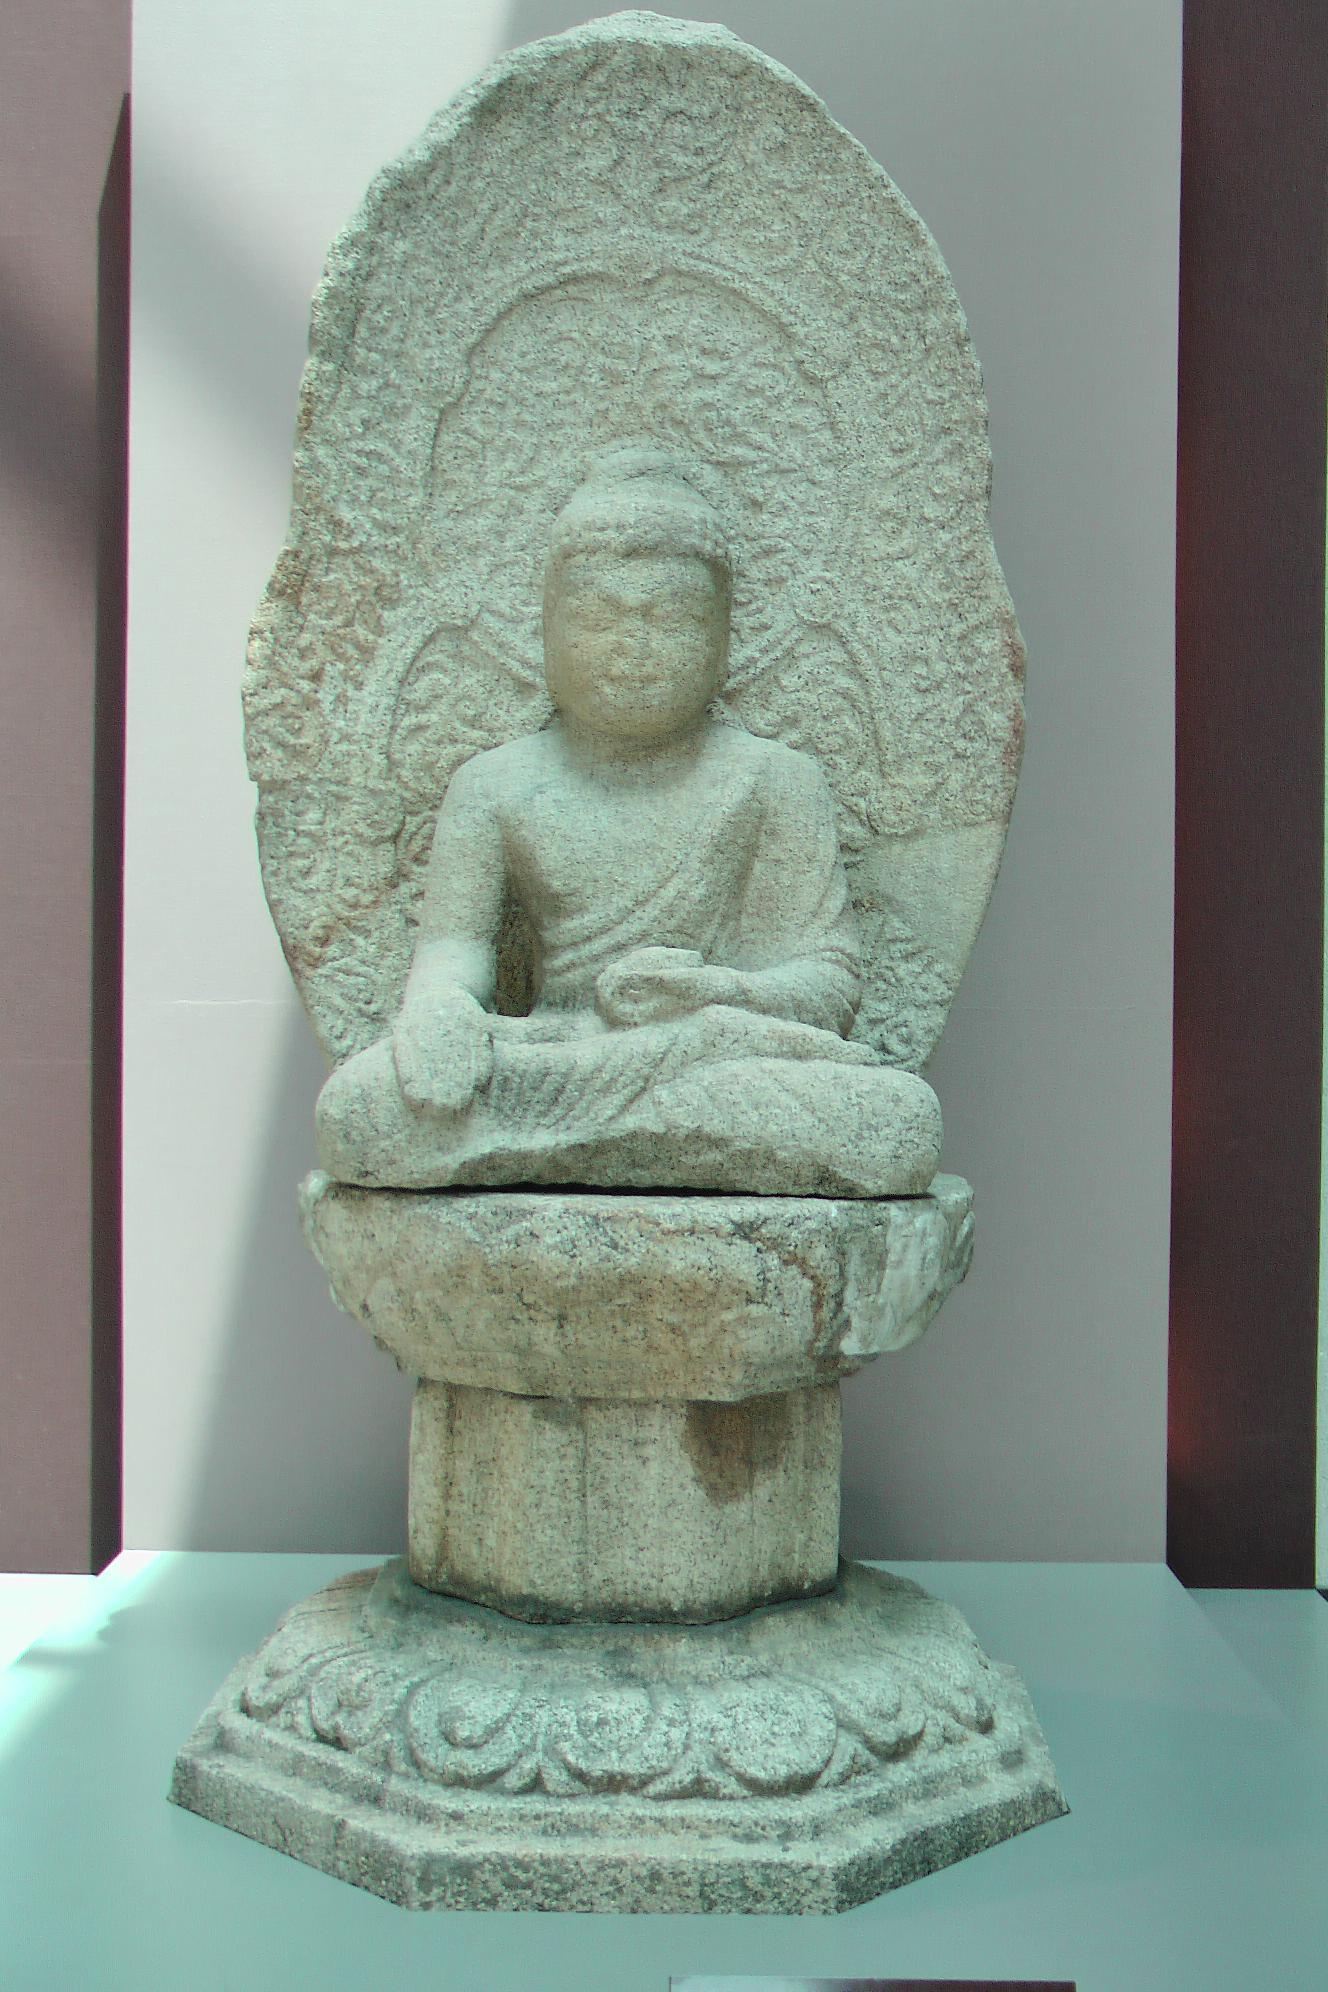 Buddha statue at the national museum